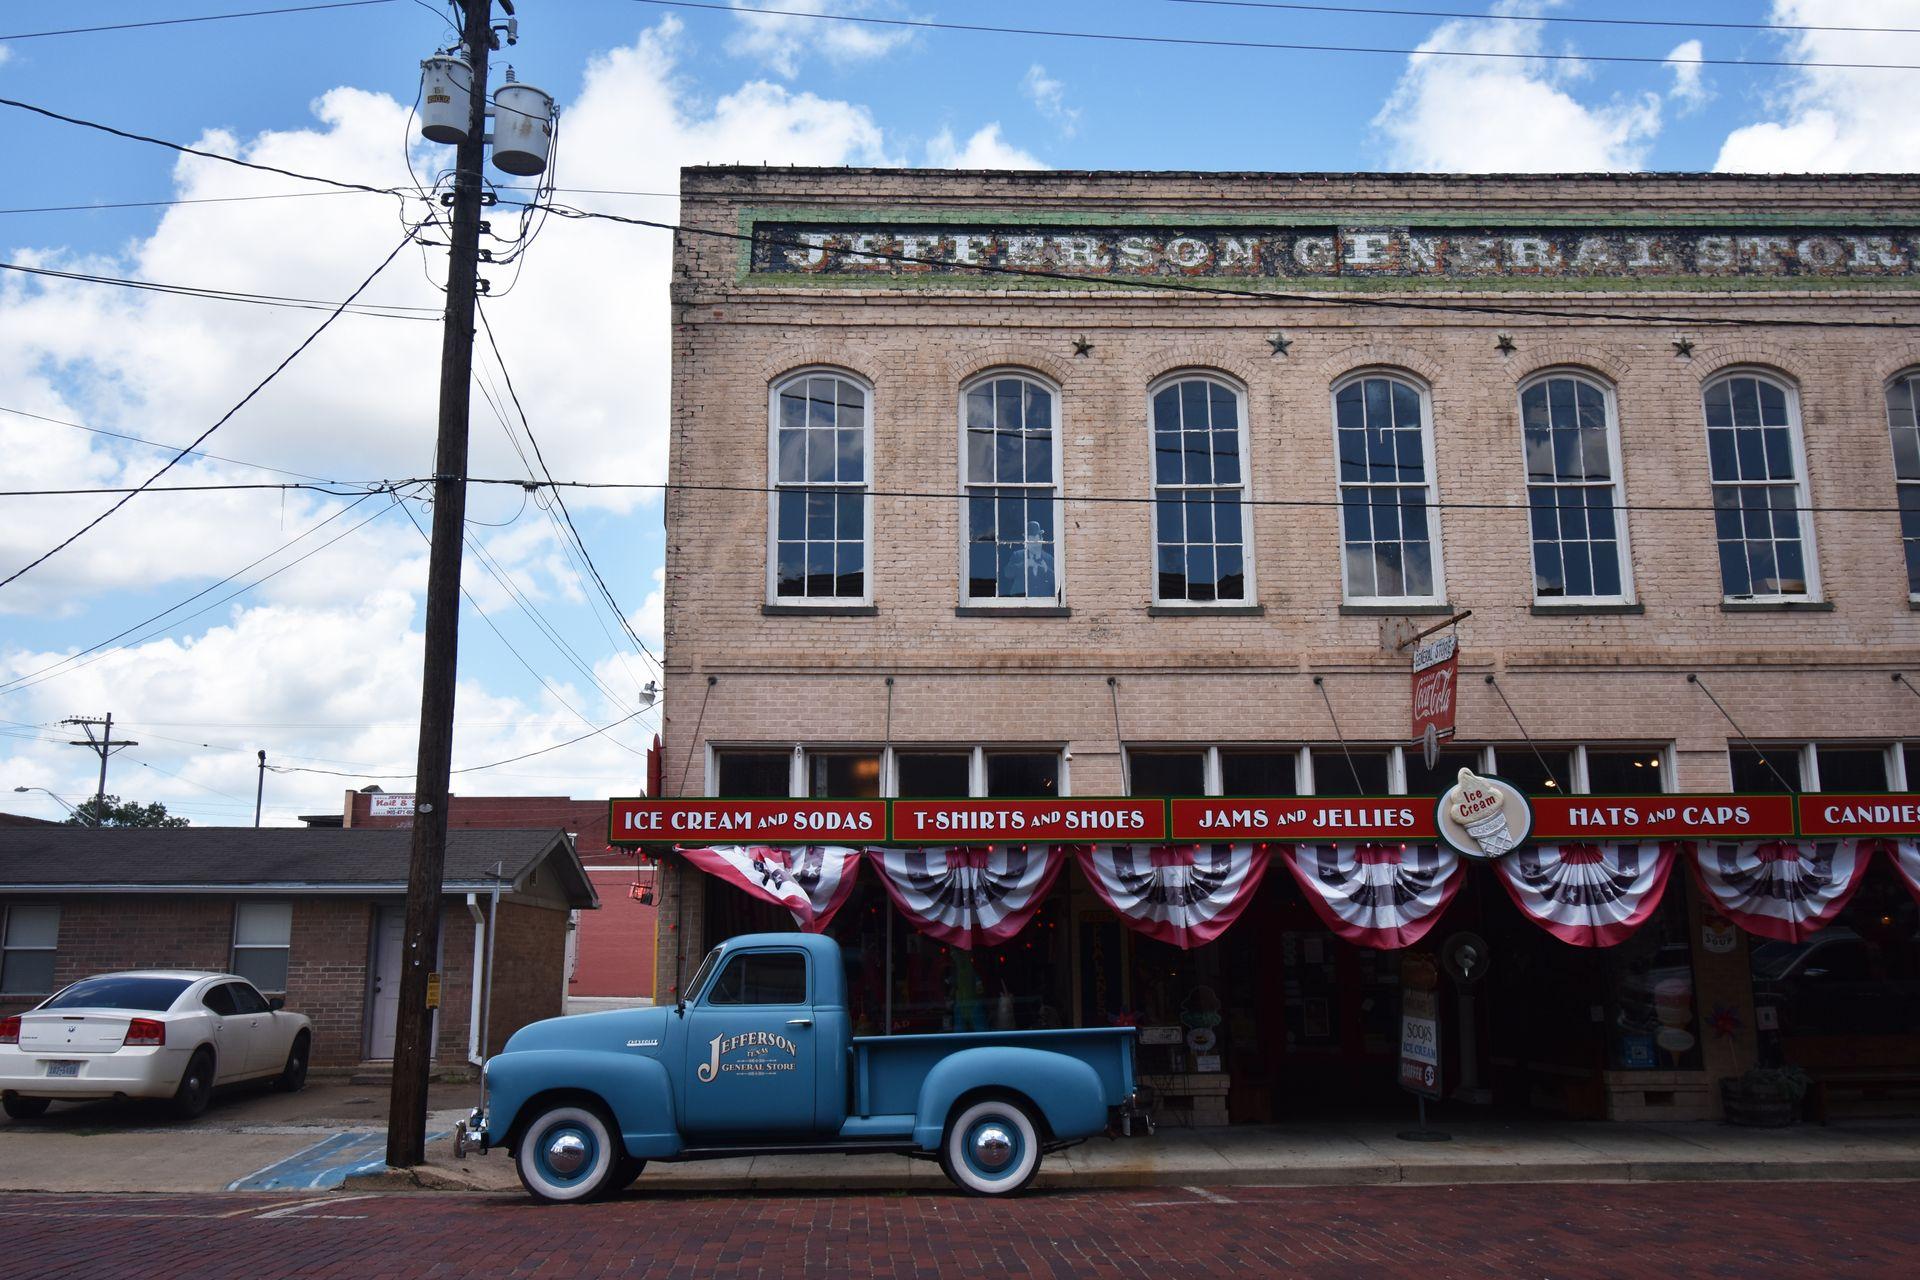 A blue pick up truck in front of the Jefferson General Store. The building is brick and has red, white and blue flags.